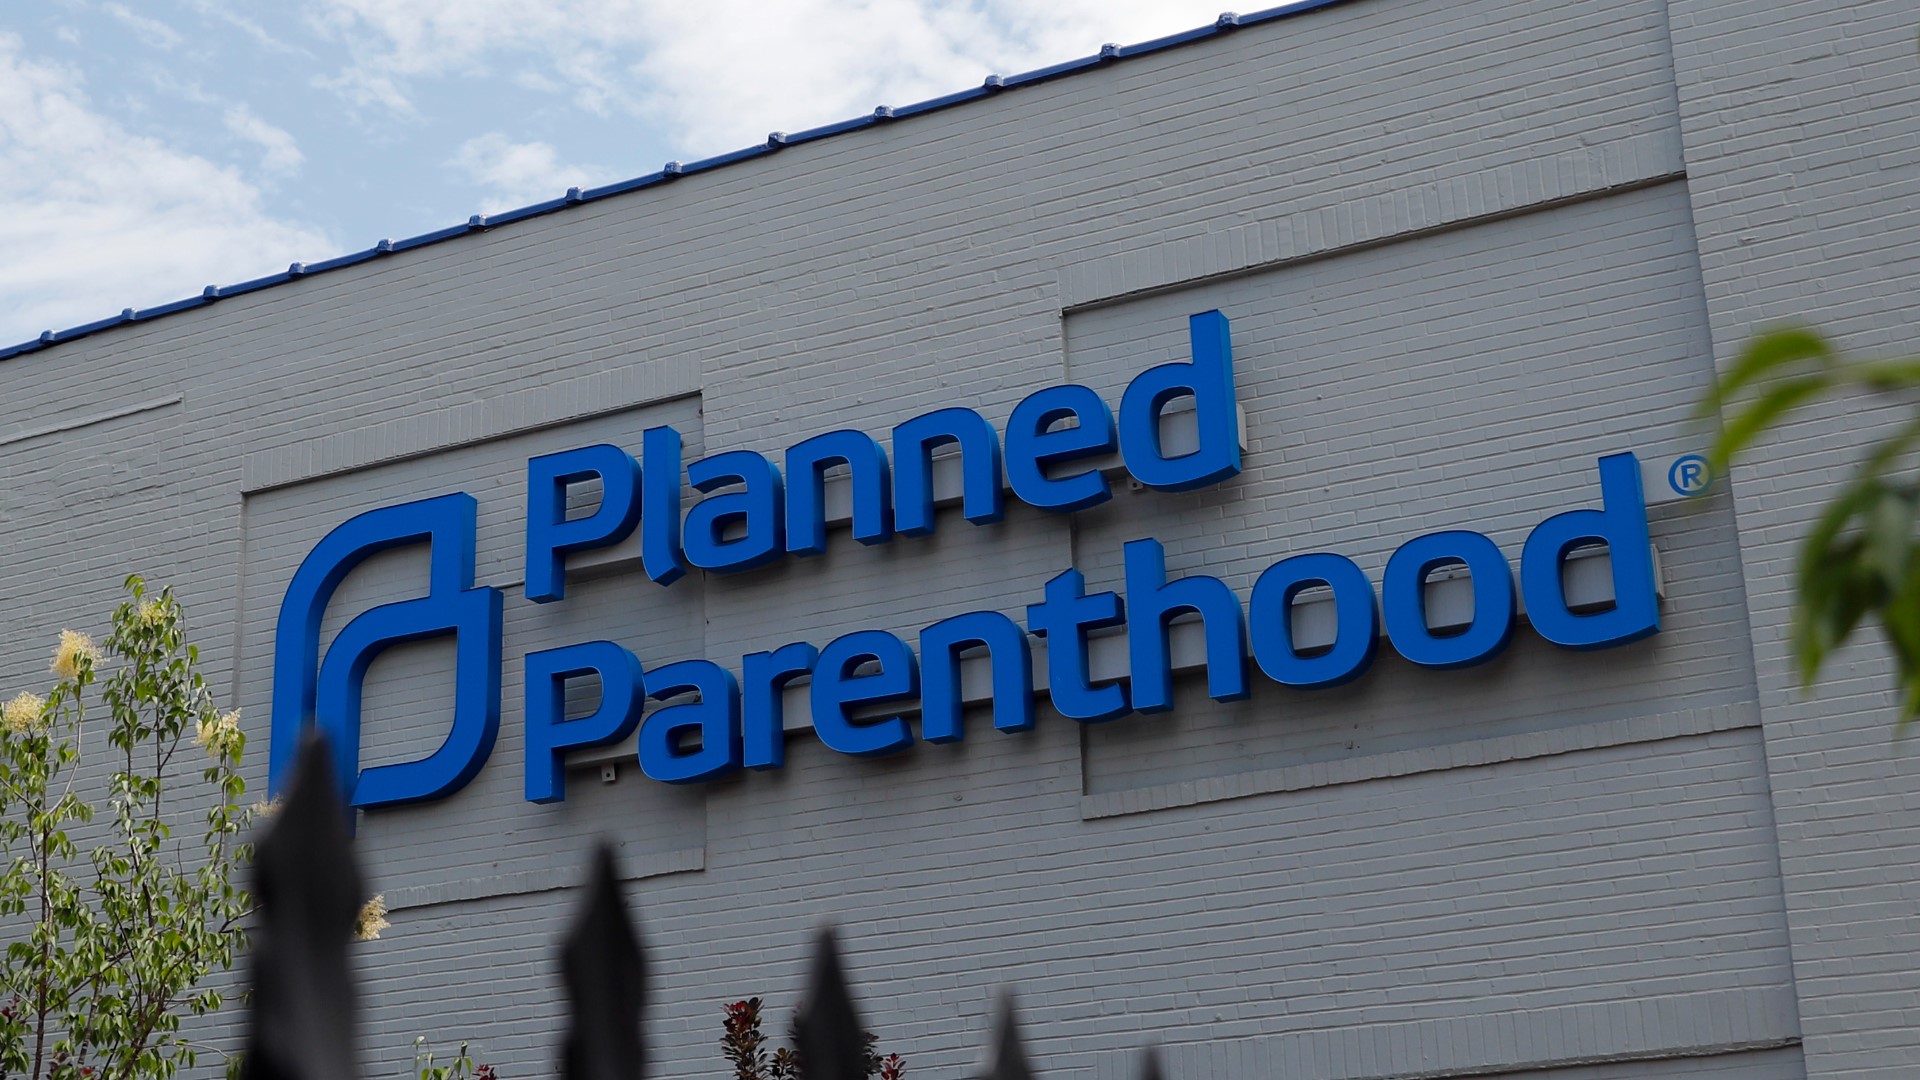 Lawyers for Planned Parenthood argued in court documents Tuesday that there's no precedent or legal support for bringing back a law banning most abortions in Iowa.